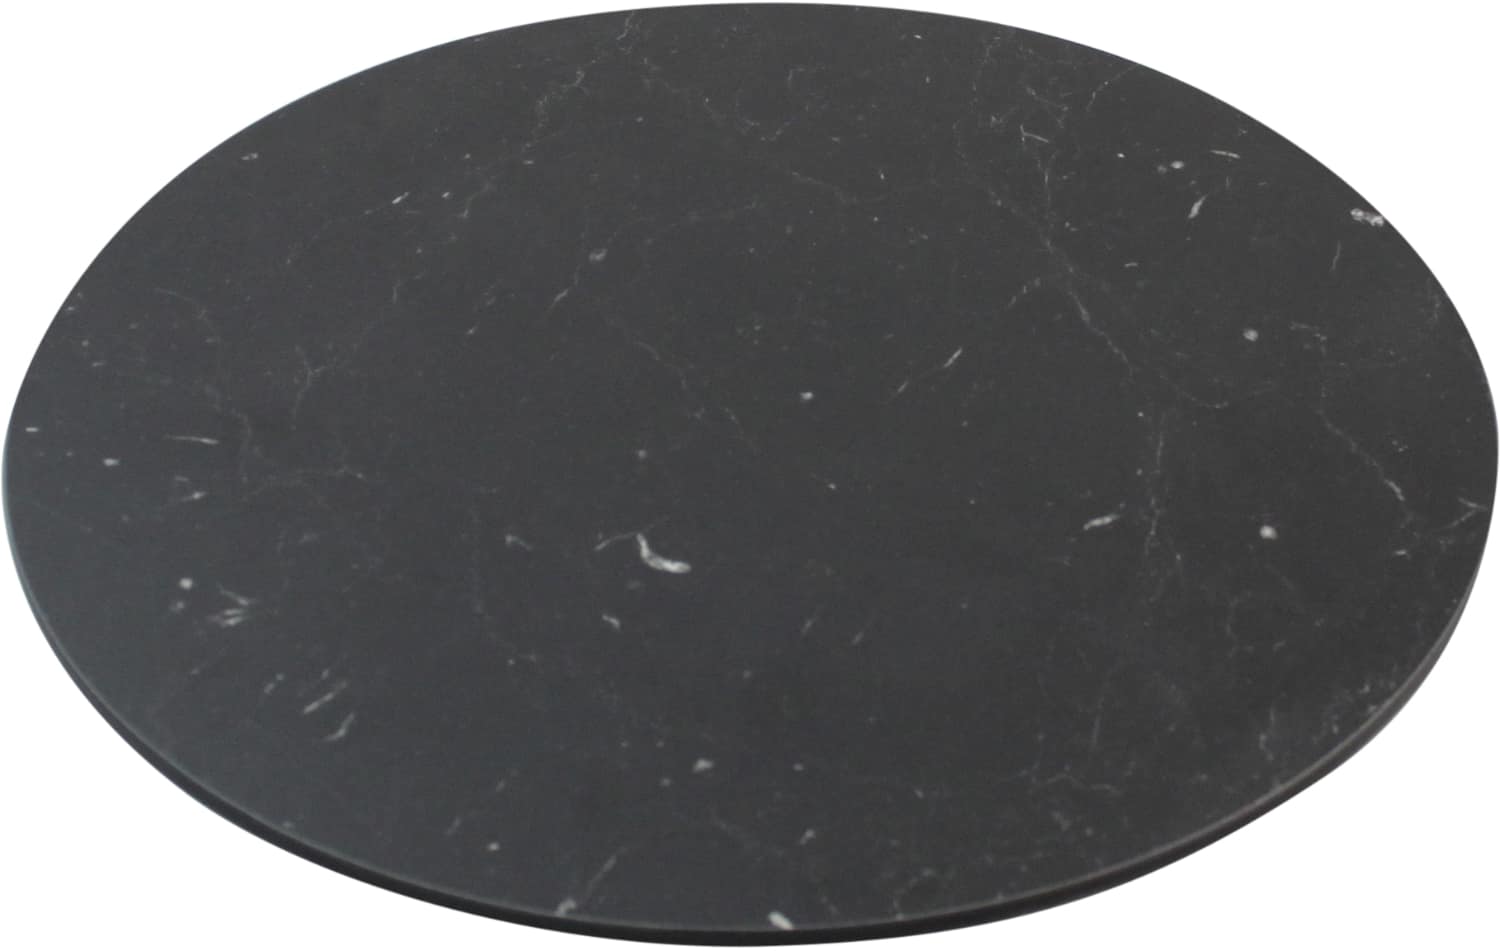 Display trays "marble" round 226120